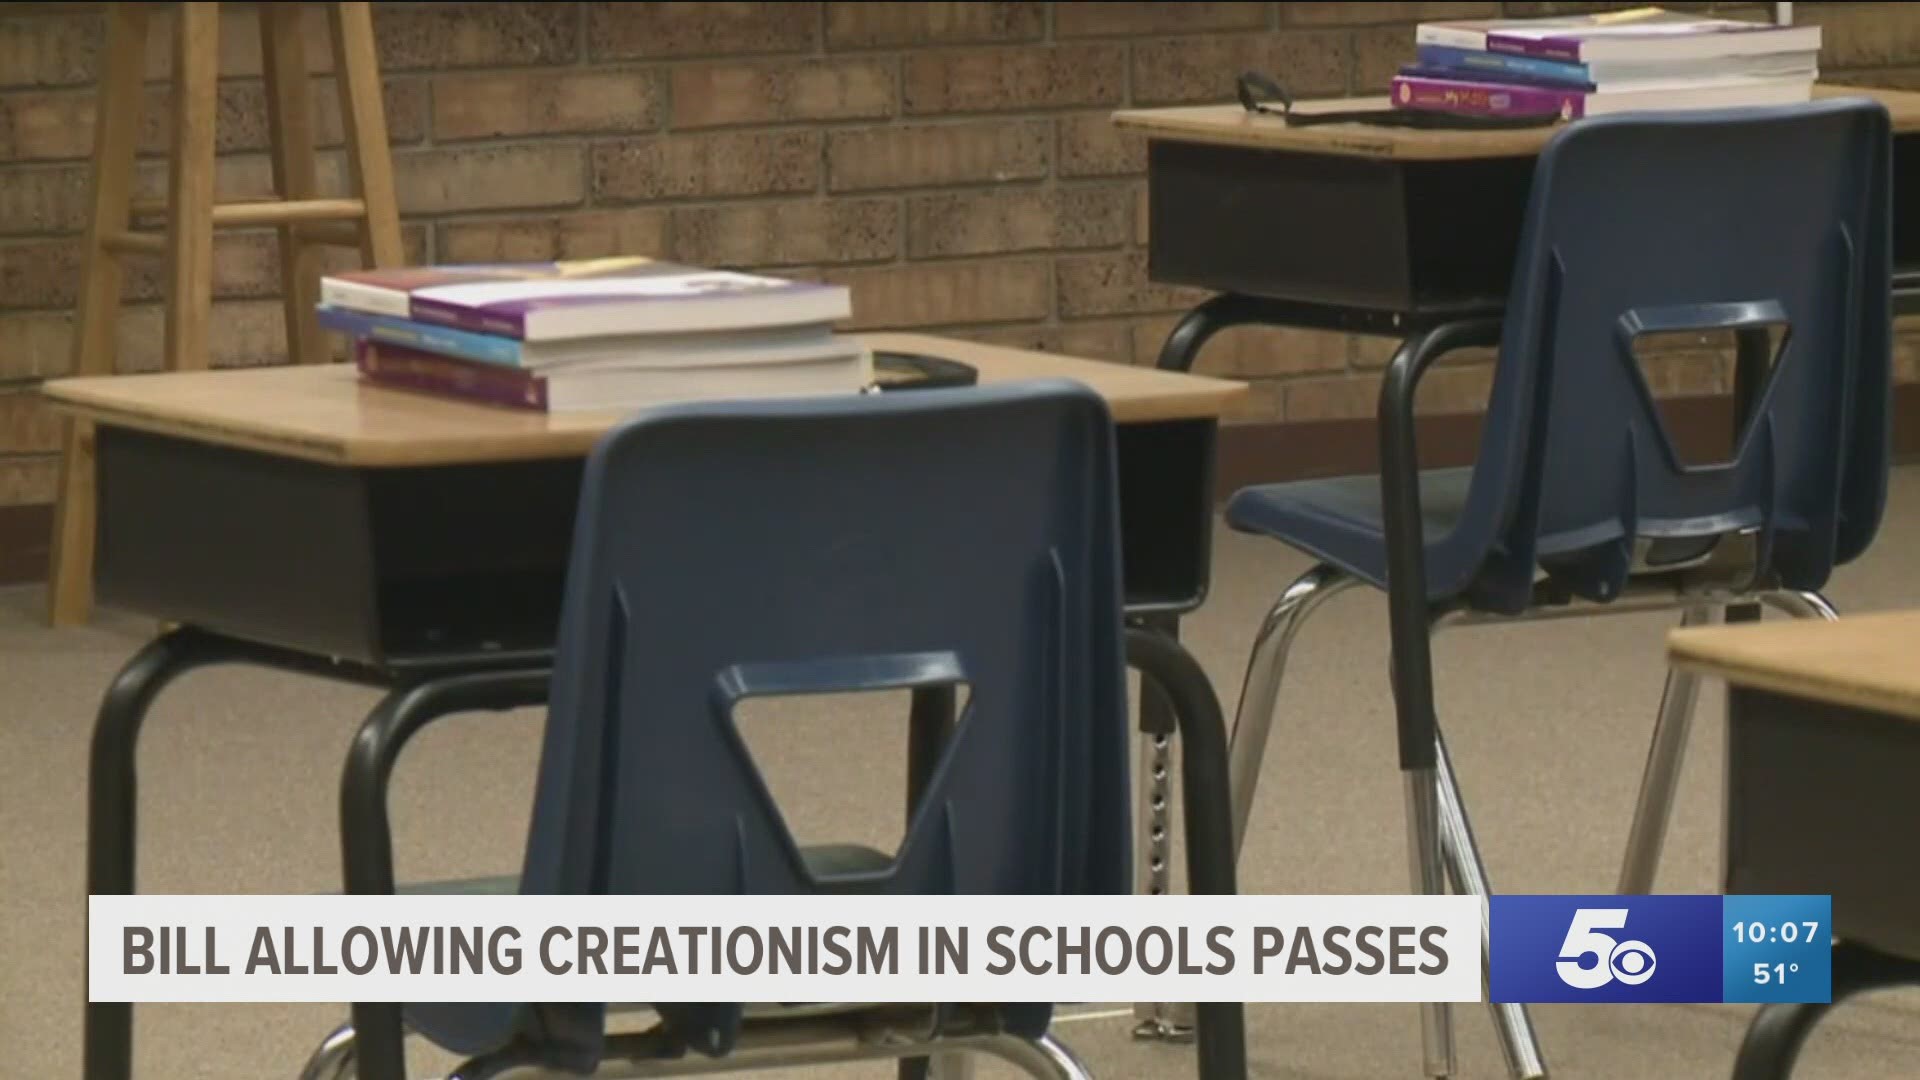 Teachers can currently teach creationism in philosophy or religion classes, but not in science classes.